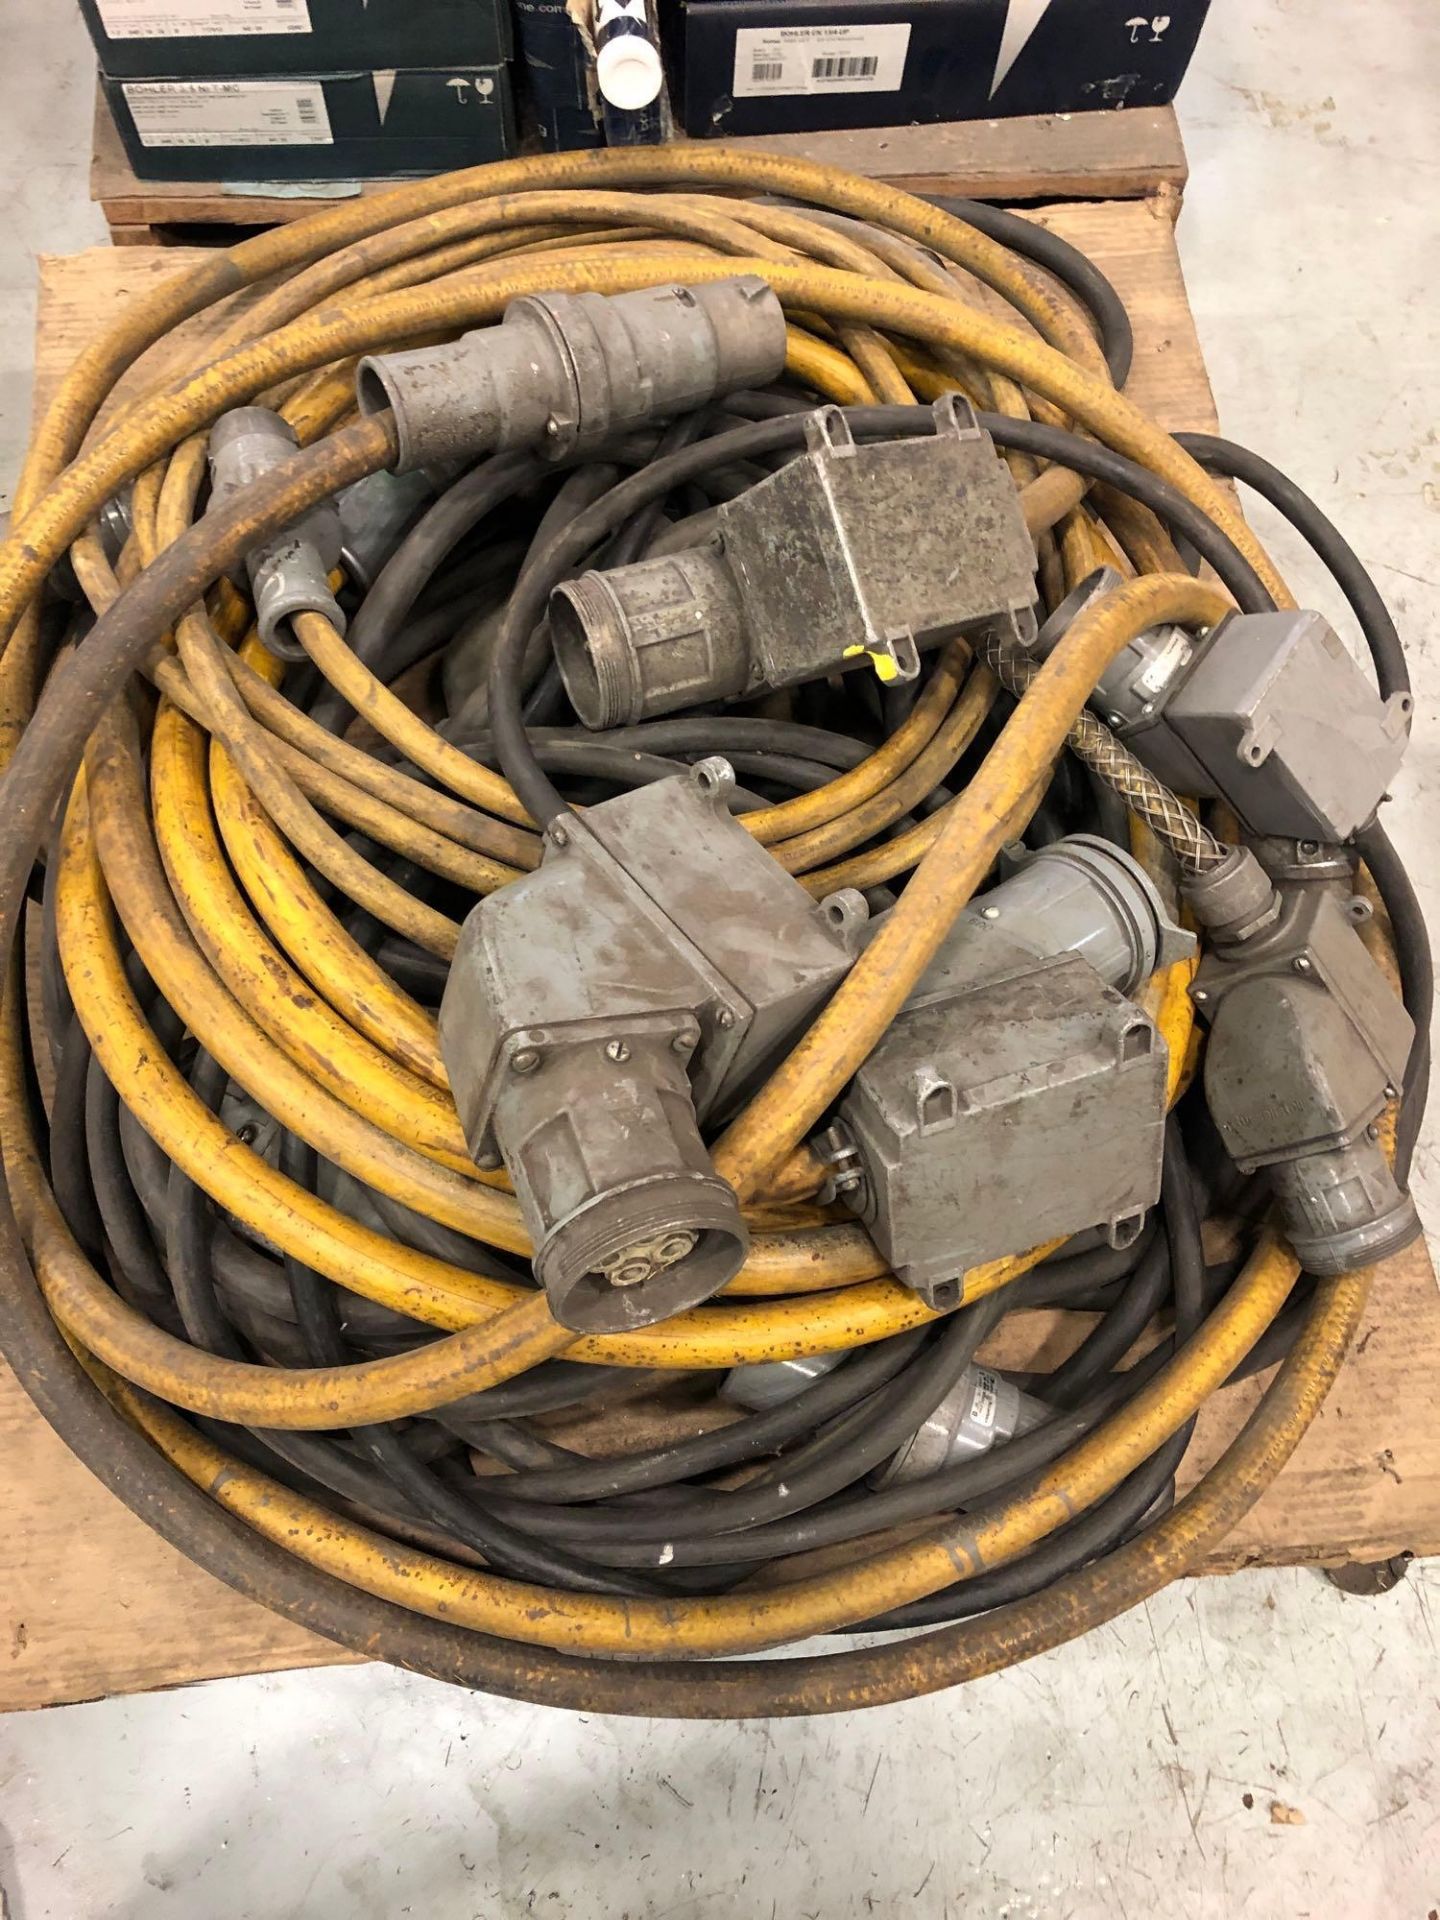 Lot of Electrical Cables w/ Connectors, Some Male & Female Connectors - Image 2 of 3